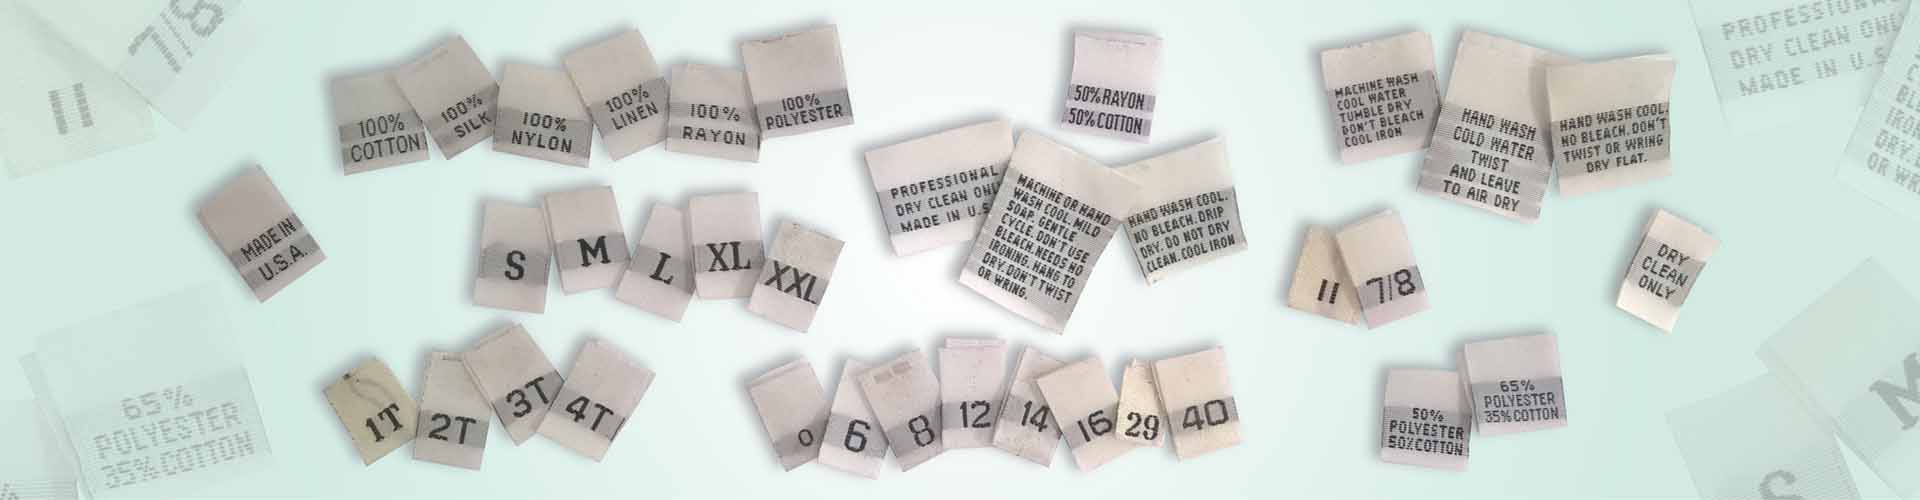 stock-woven-labels